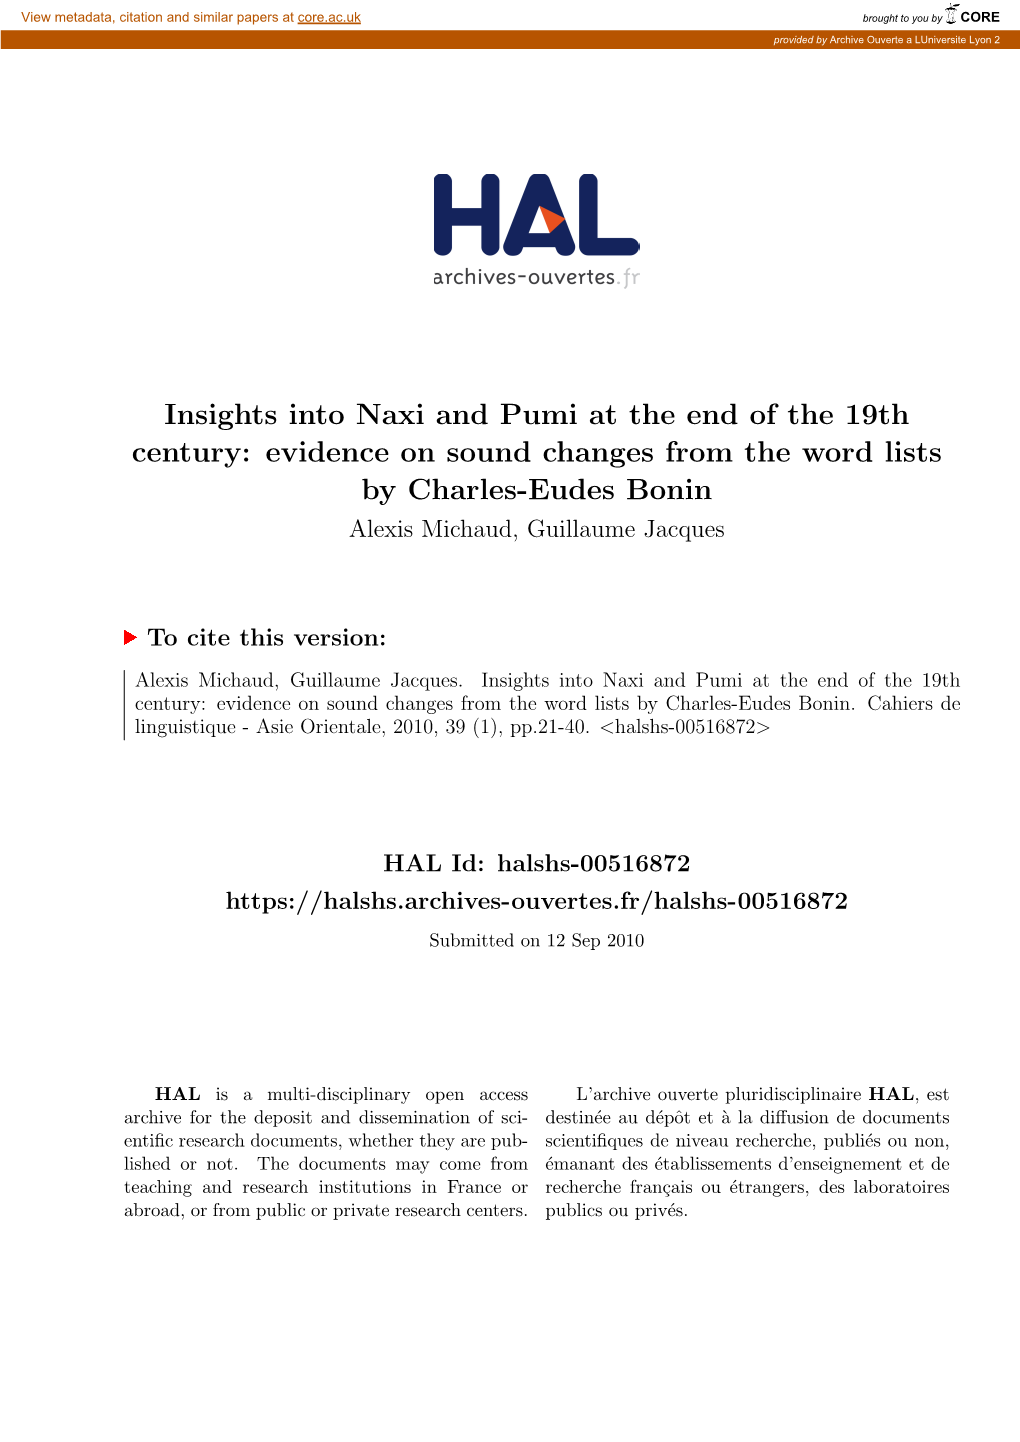 Insights Into Naxi and Pumi at the End of the 19Th Century: Evidence on Sound Changes from the Word Lists by Charles-Eudes Bonin Alexis Michaud, Guillaume Jacques